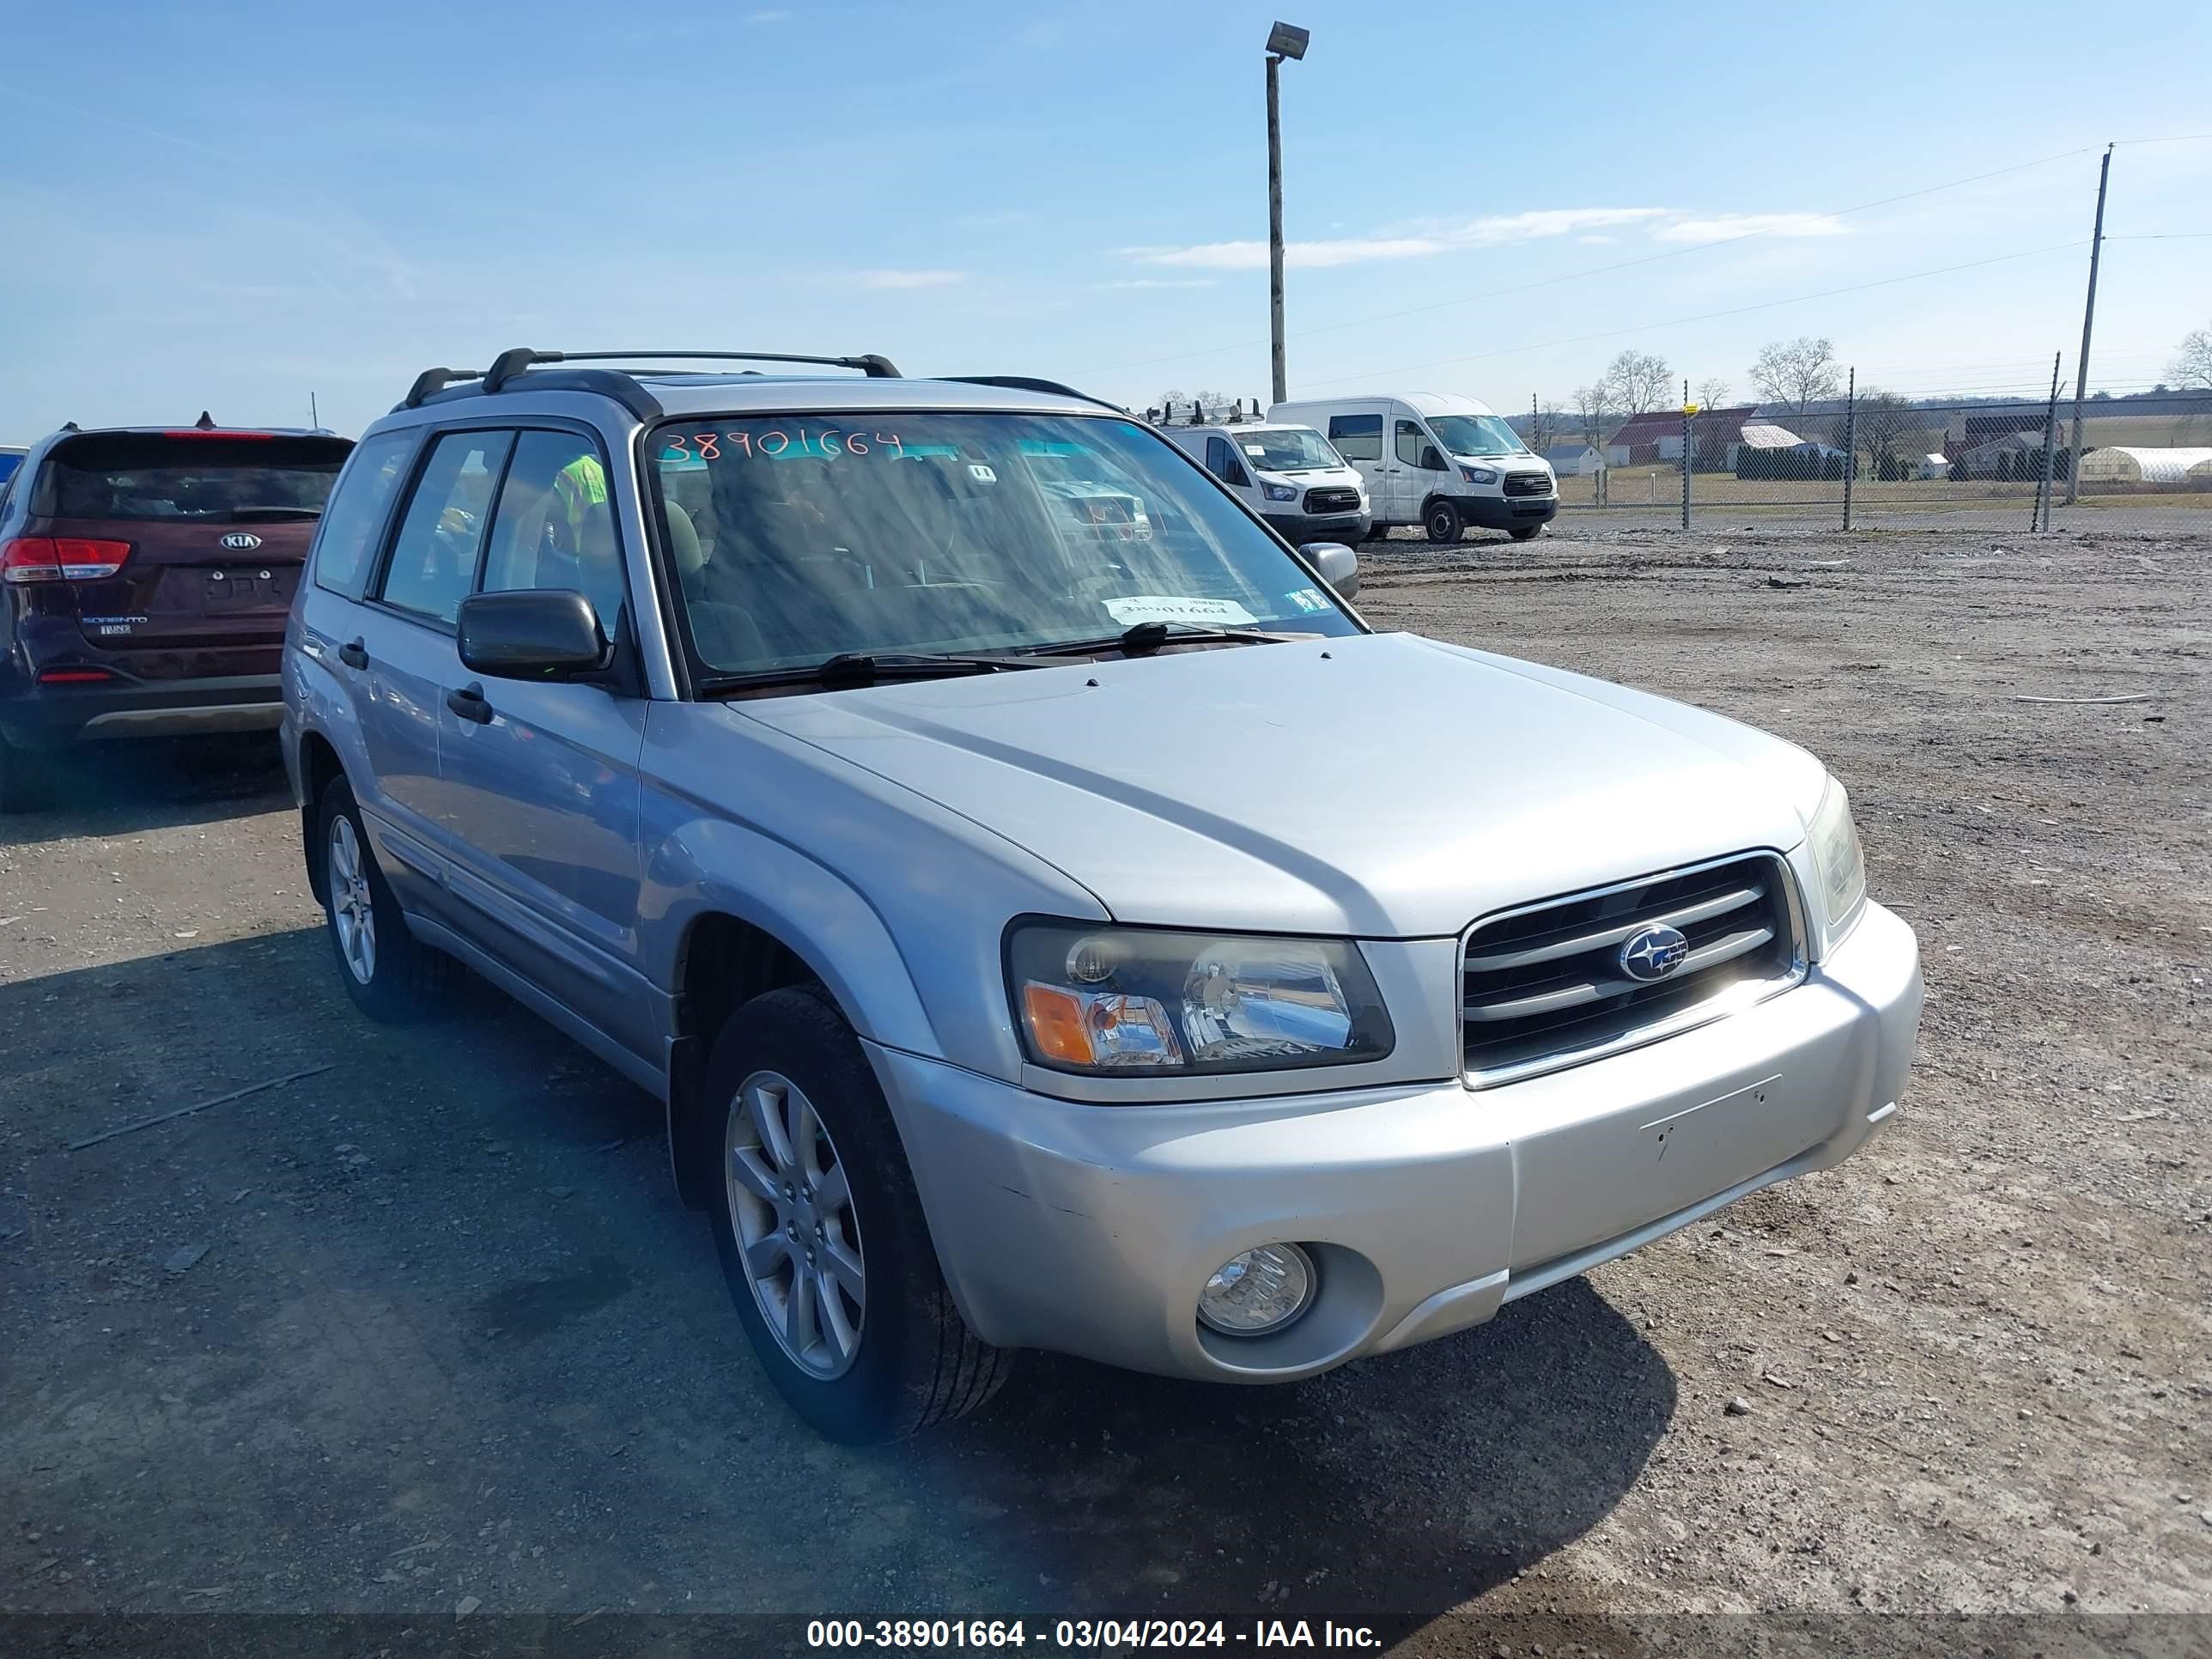 vin: JF1SG65675H722620 JF1SG65675H722620 2005 subaru forester 2500 for Sale in 17372, 10 Auction Drive, Latimore Township, Pennsylvania, USA